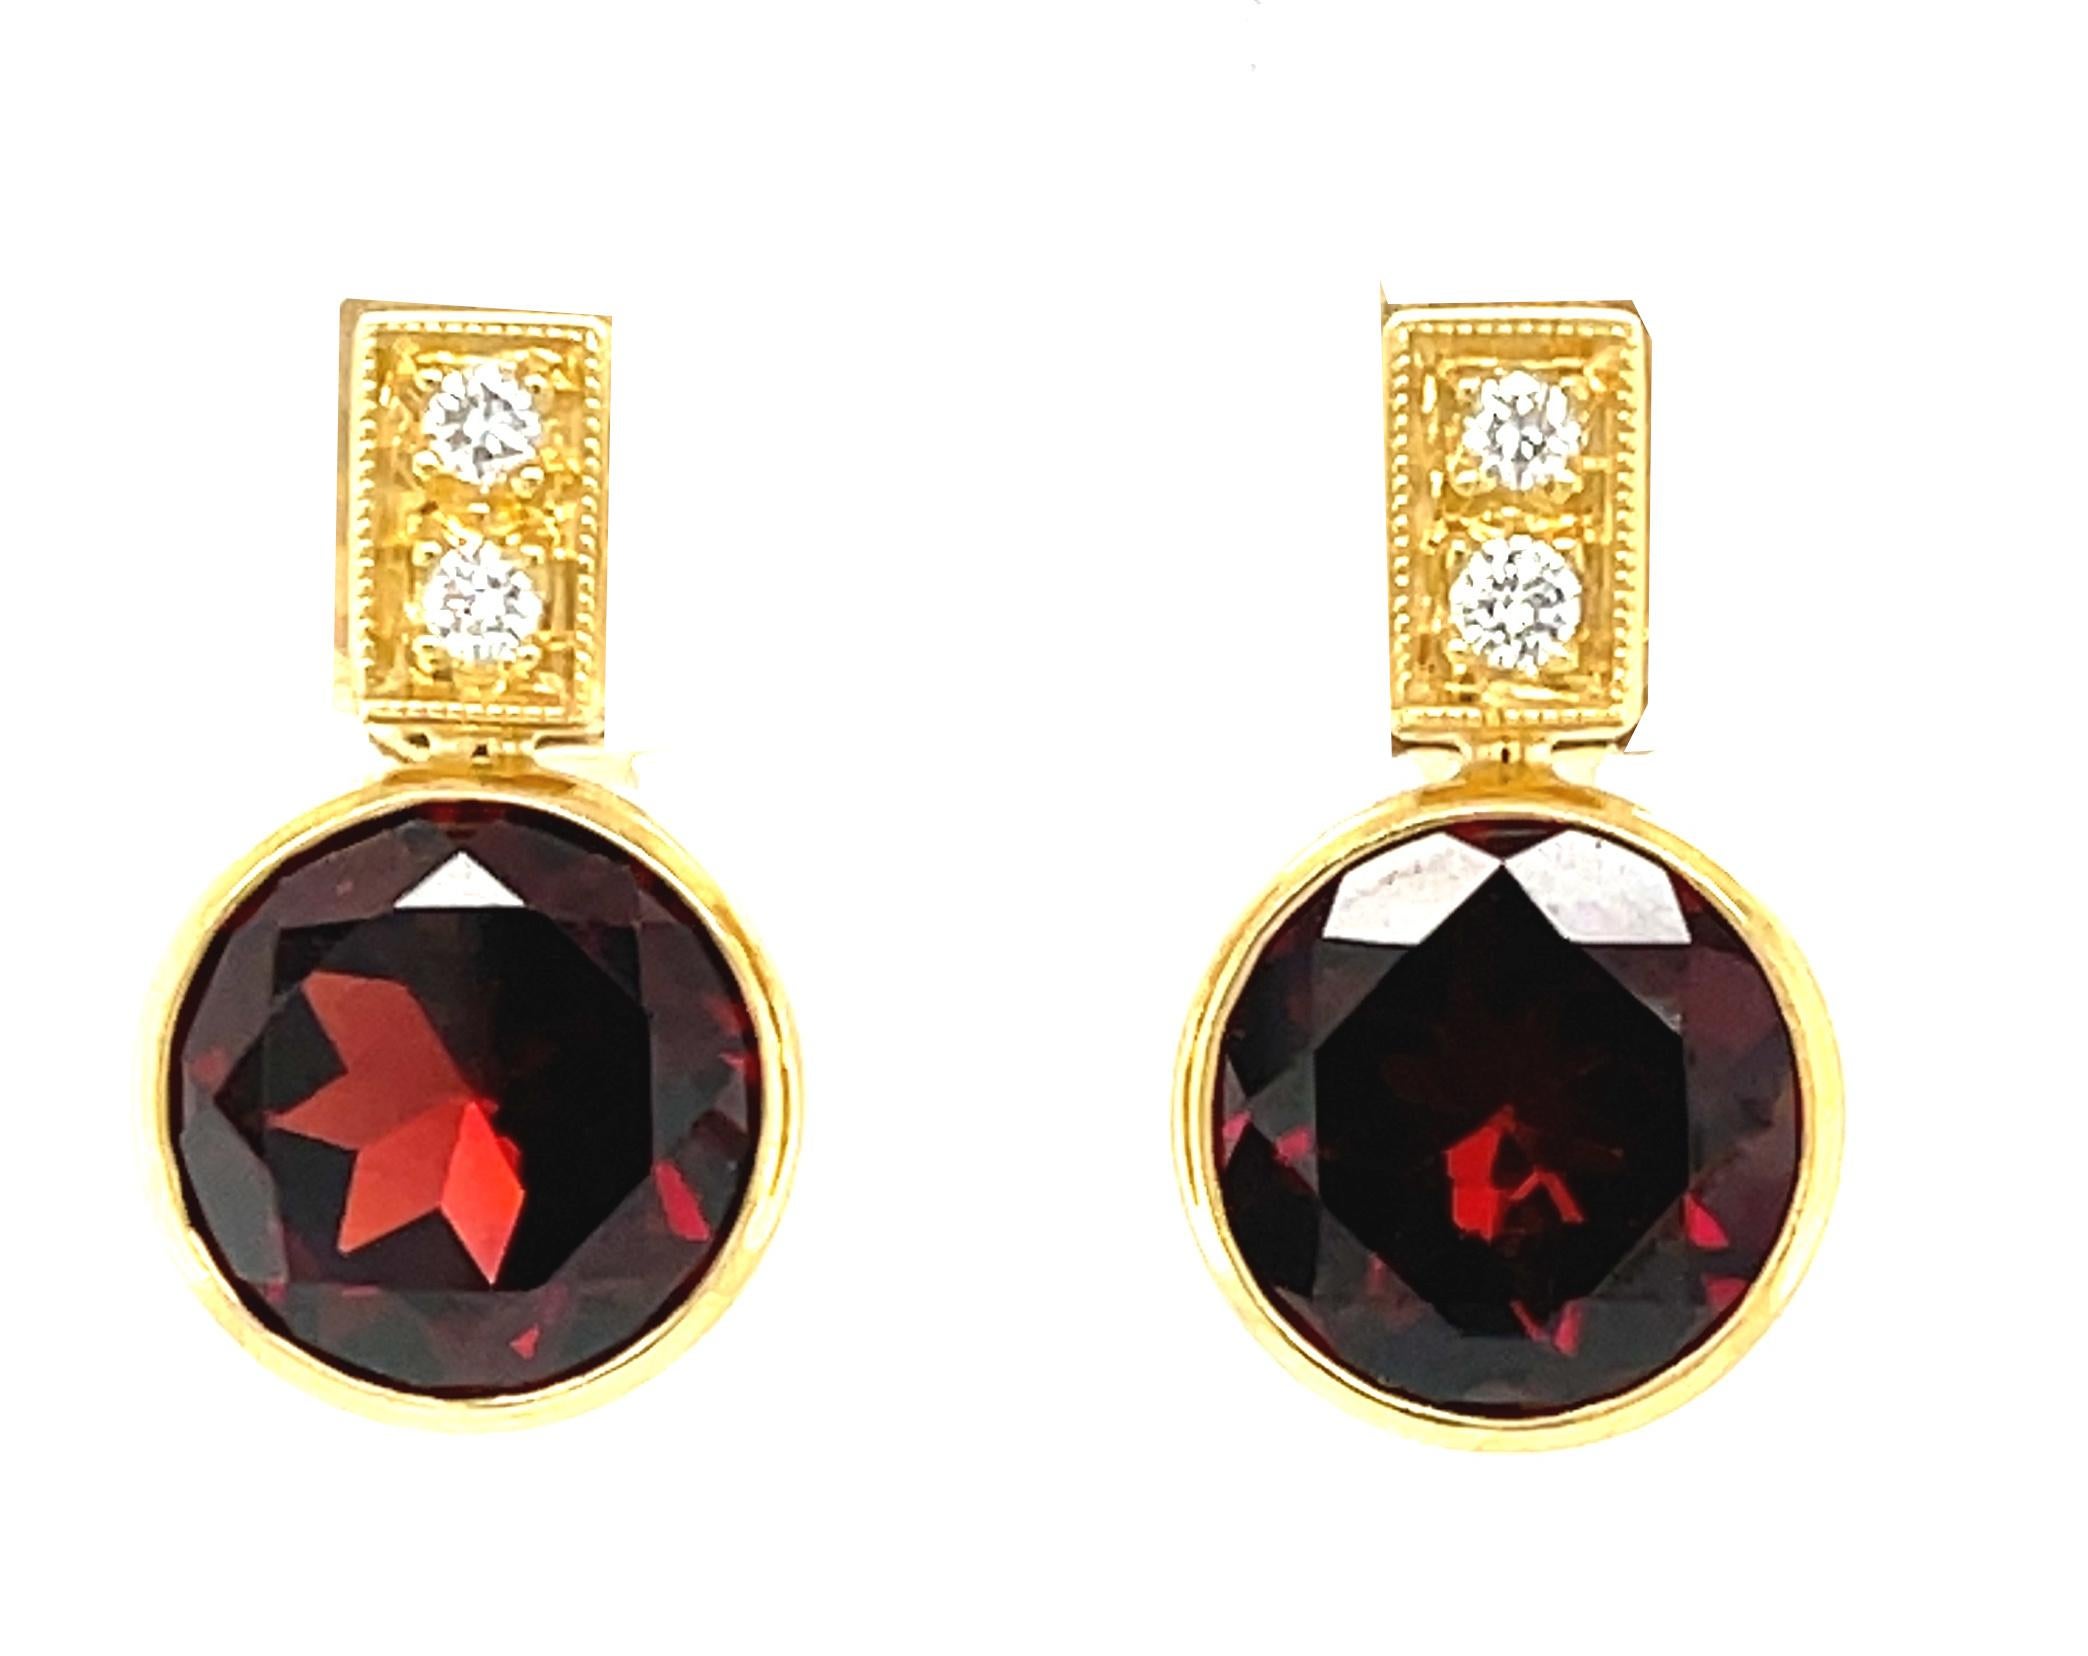 Large, round burgundy color garnets are bezel set in these pretty drop earrings... grown-up girl size! I designed this style of earring to look good on any earlobe, even those with stretched or torn pierced holes. Four diamonds add sparkle. A great